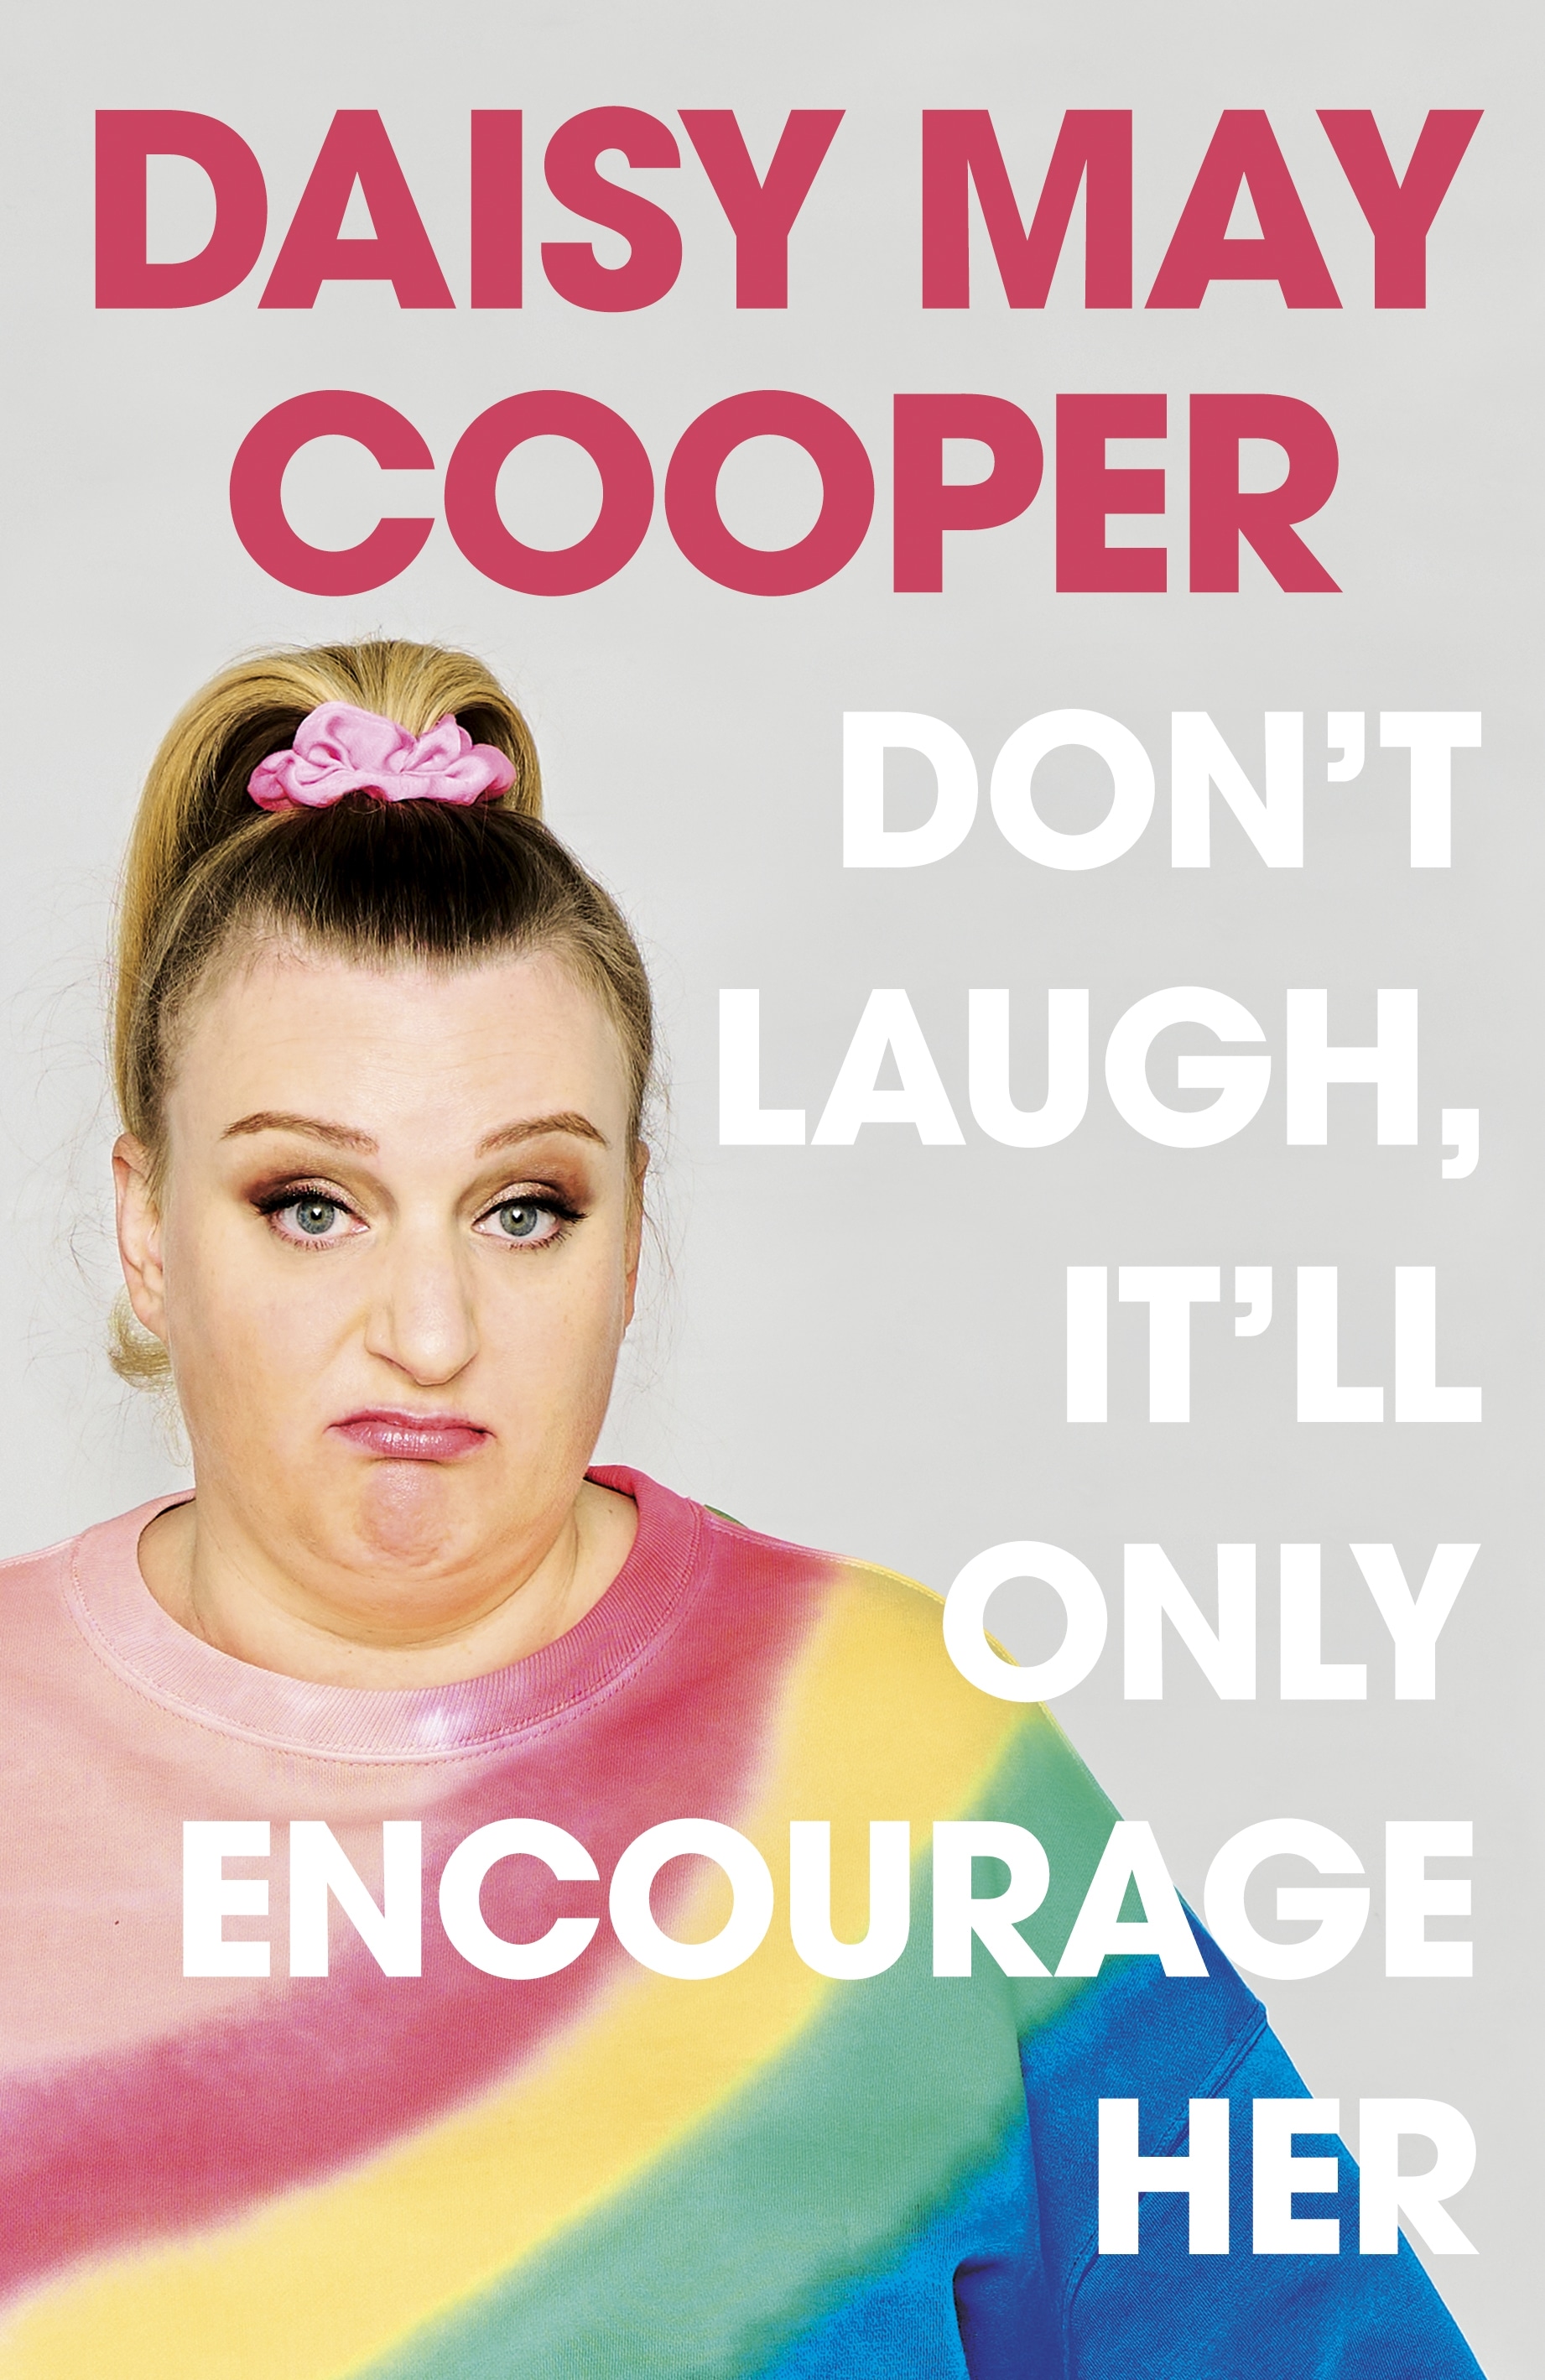 Book “Don't Laugh, It'll Only Encourage Her” by Daisy May Cooper — October 28, 2021